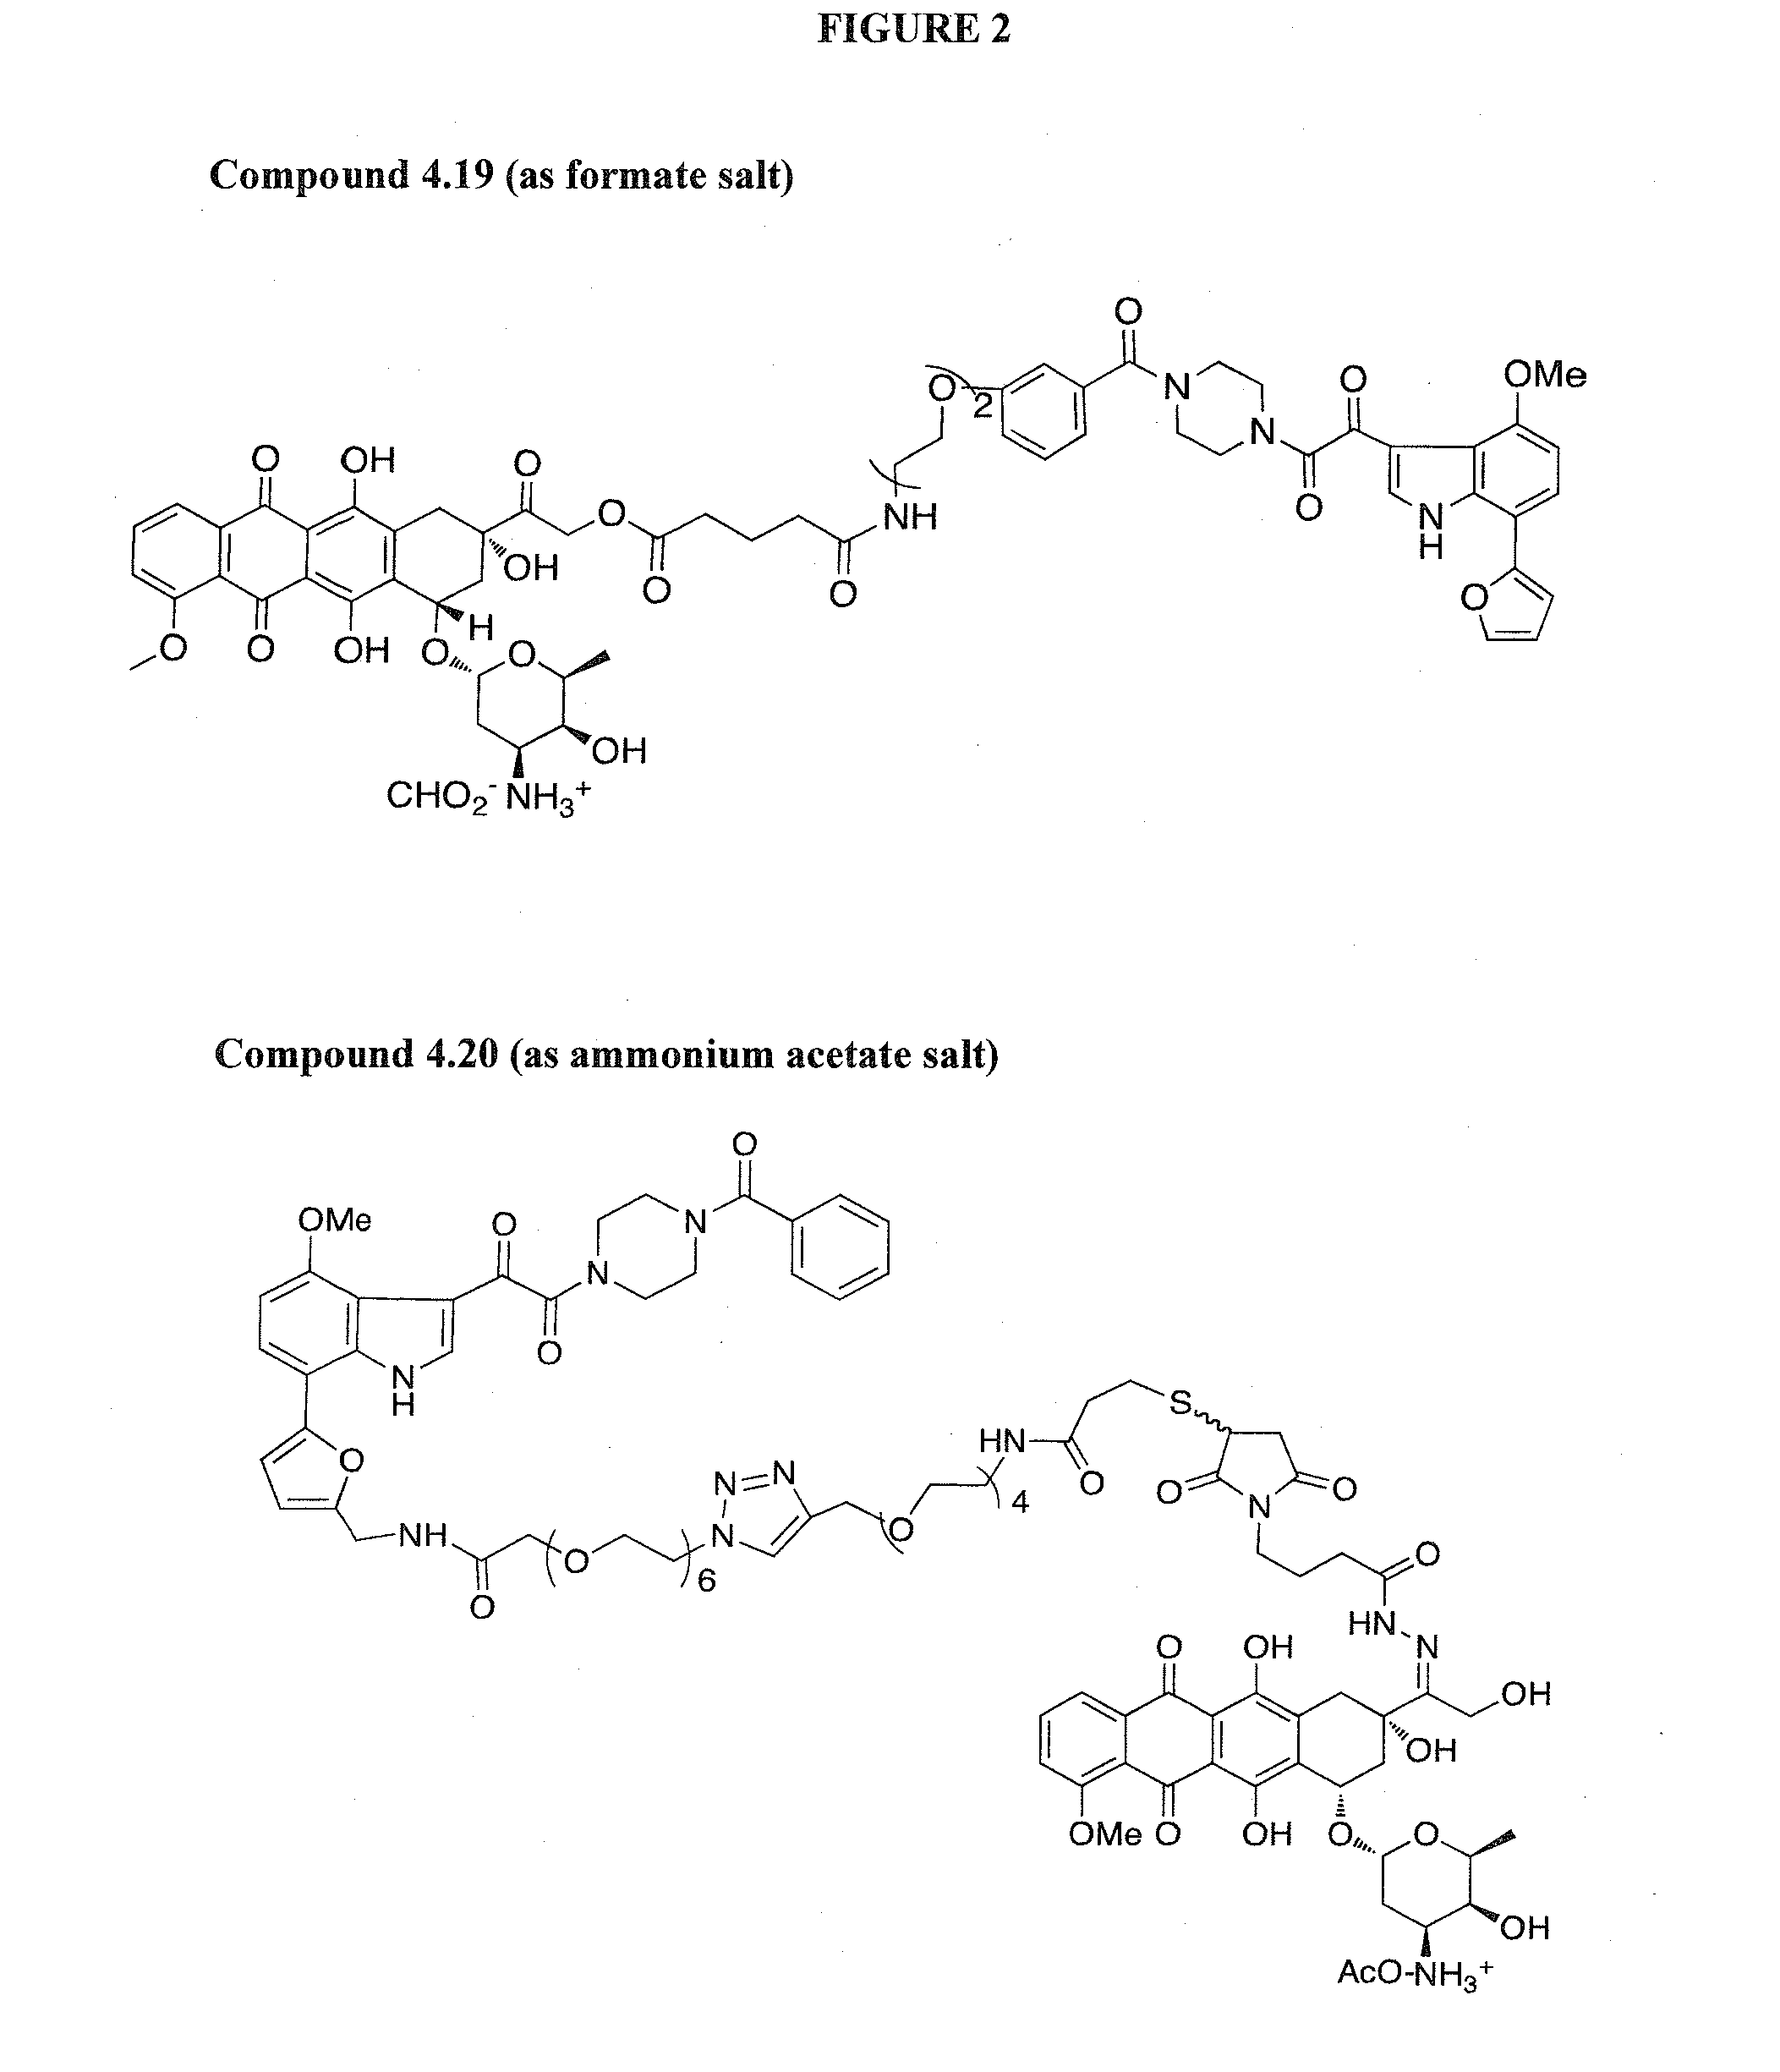 Cytotoxic-drug delivering molecules targeting HIV (cdm-hs), cytotoxic activity against the human immunodeficiency virus and methods of use